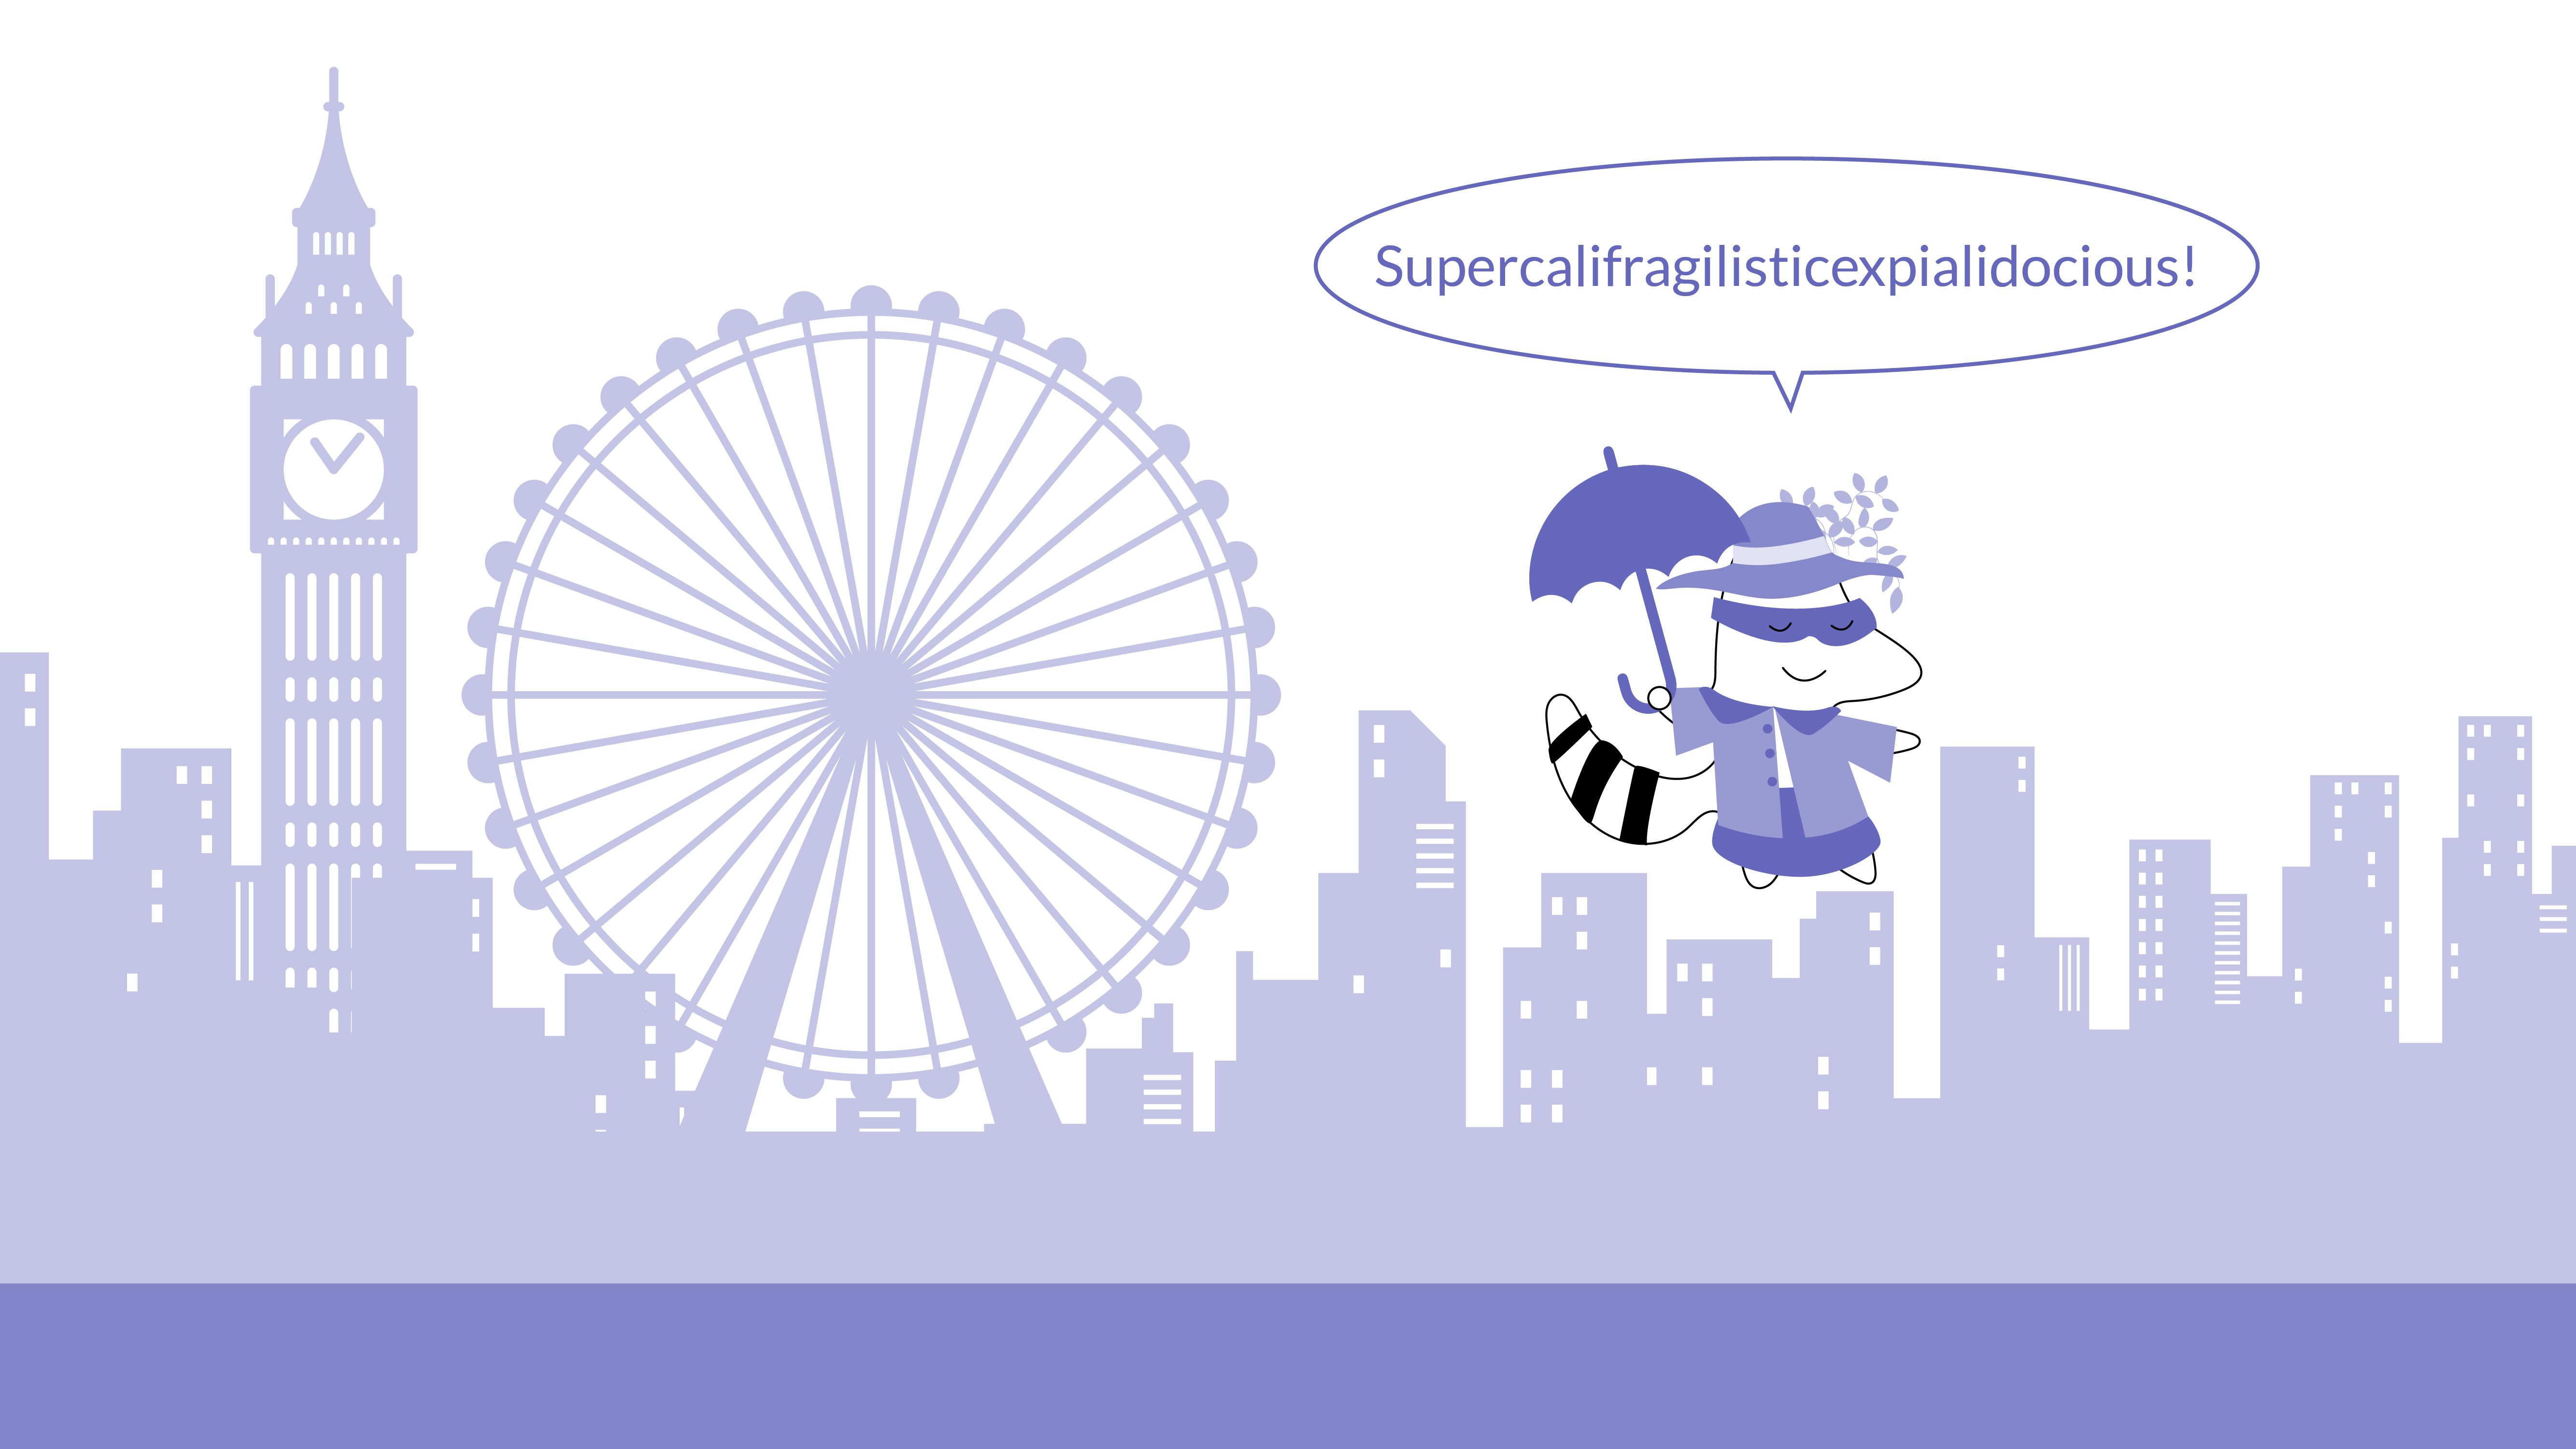 Iggy, dressed as Mary Poppins, dances with an umbrella, saying, “Supercalifragilisticexpialidocious!”